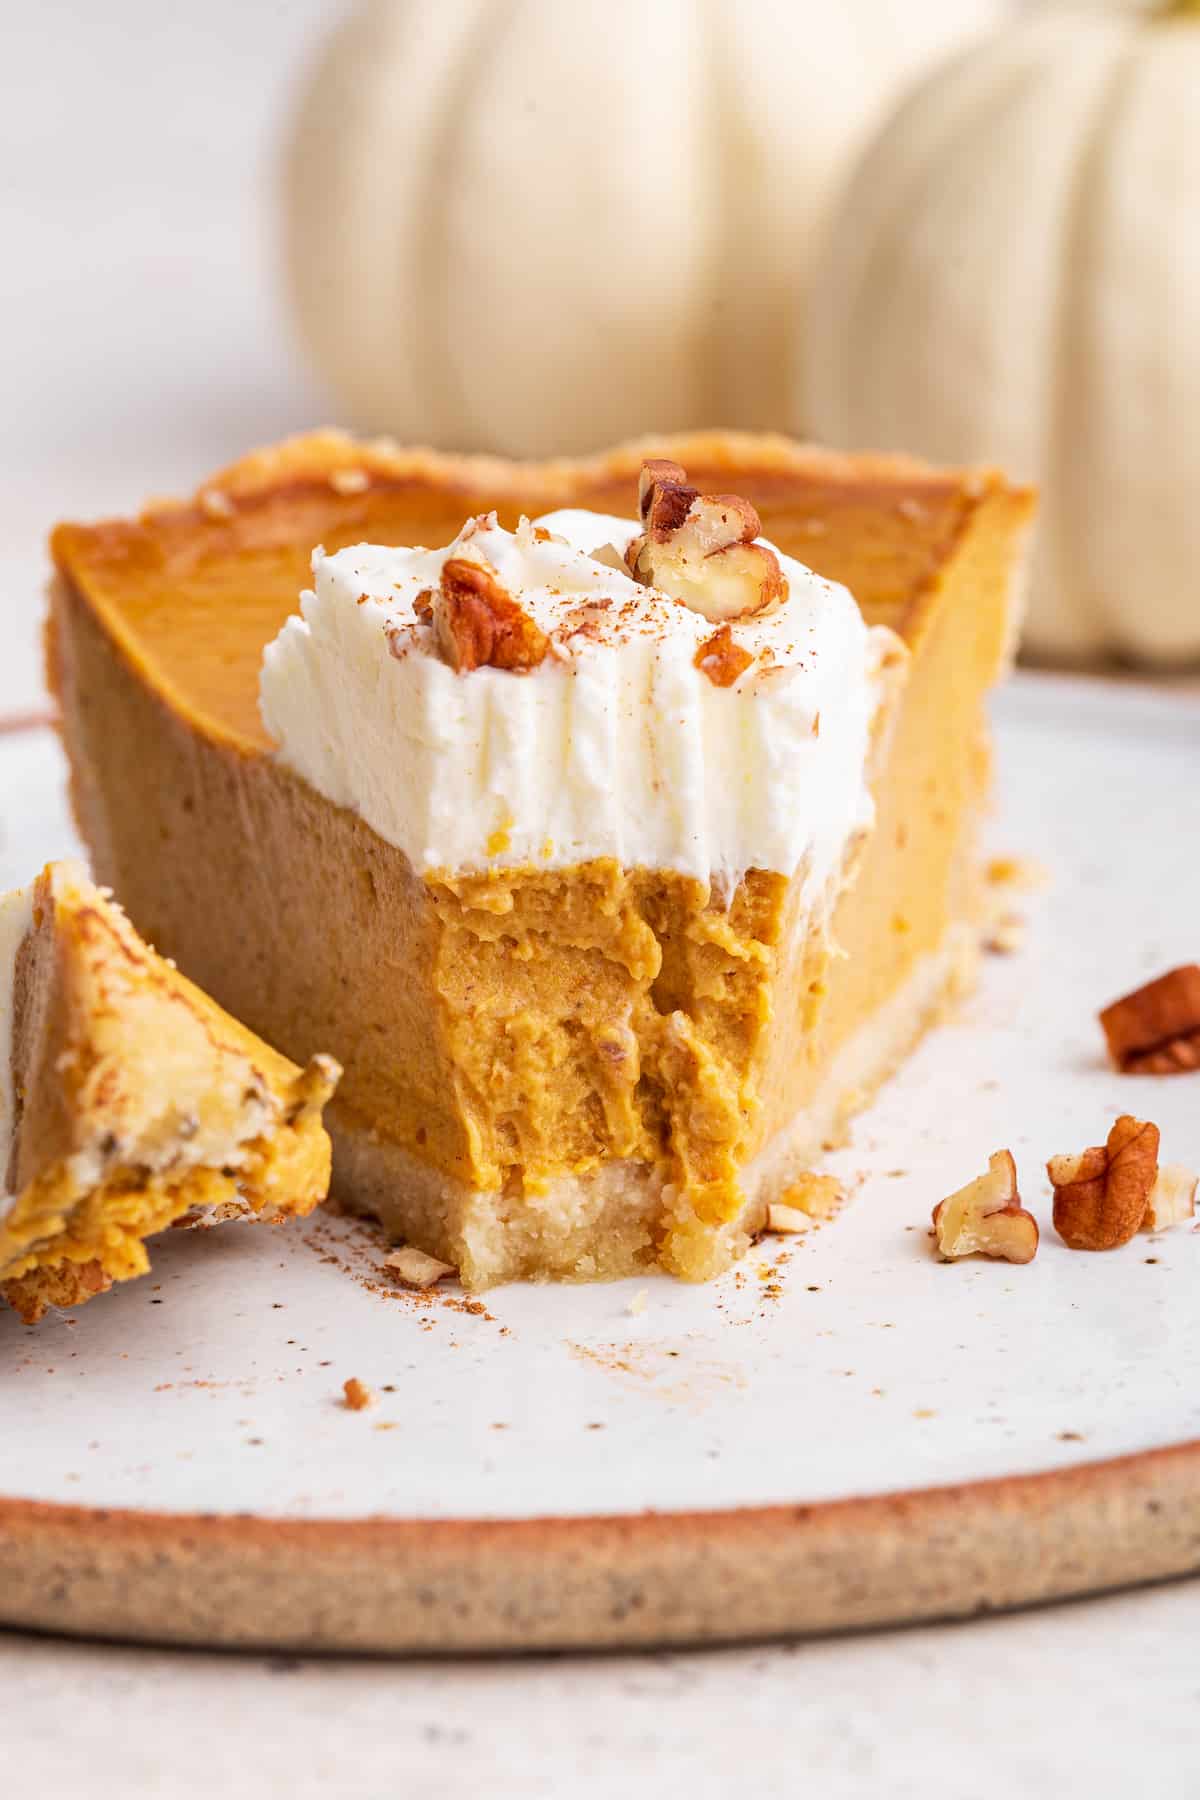 Gluten-free pumpkin pie on plate topped with whipped cream and nuts